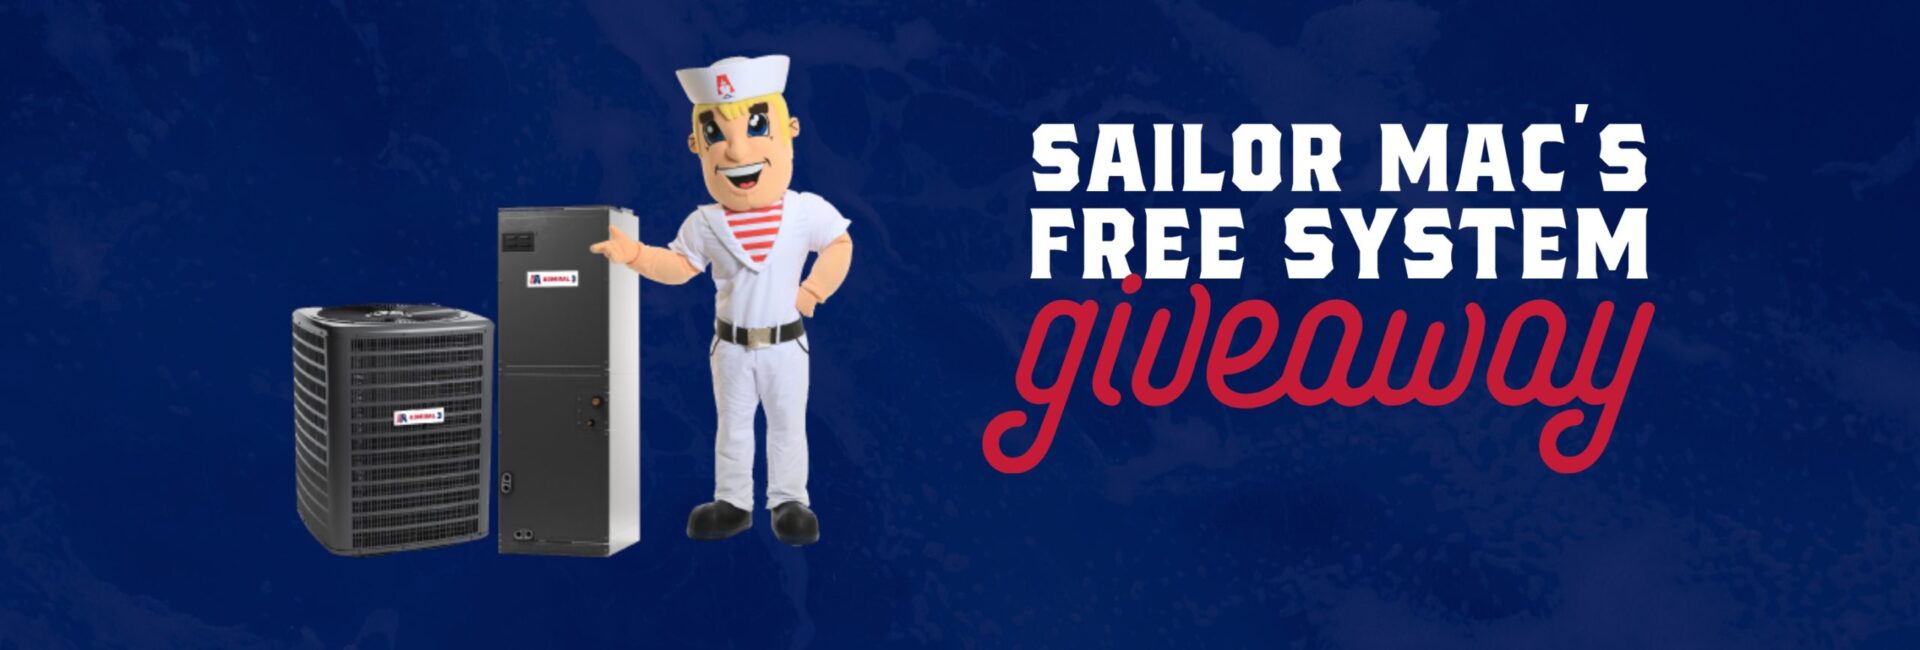 McWilliams and Son hosts the Sailor Mac System Giveaway!